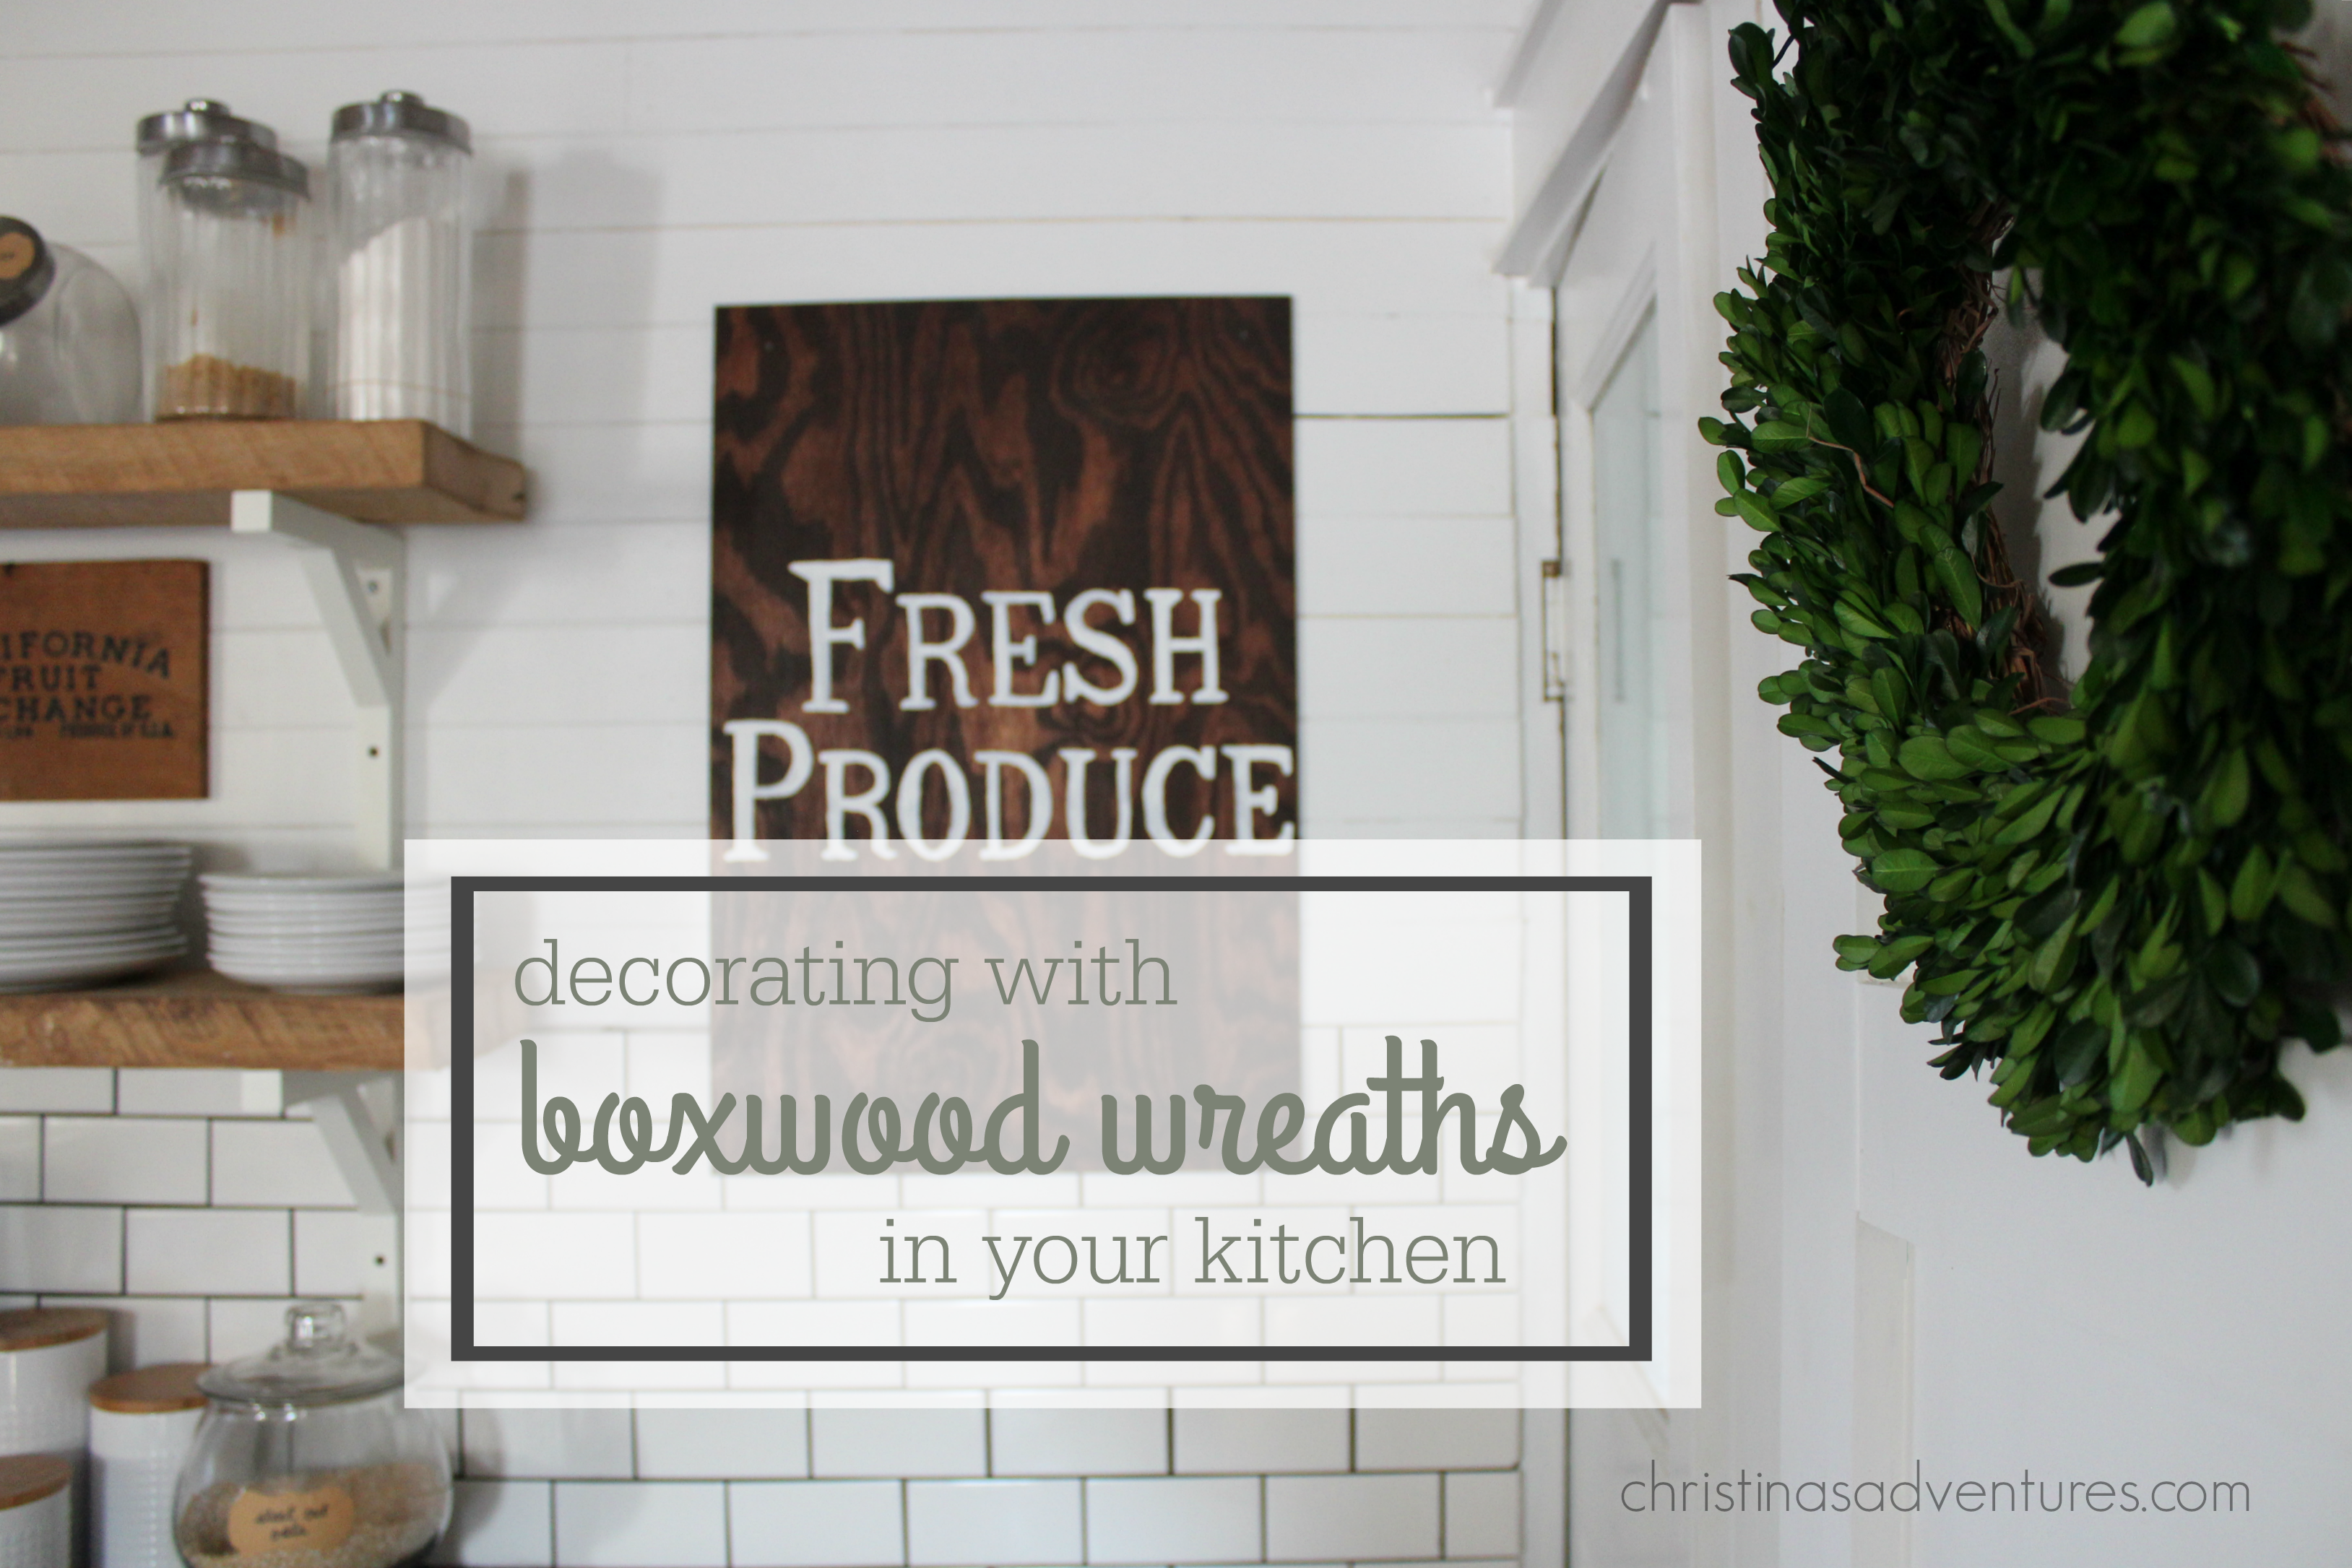 Decorating with boxwood wreaths